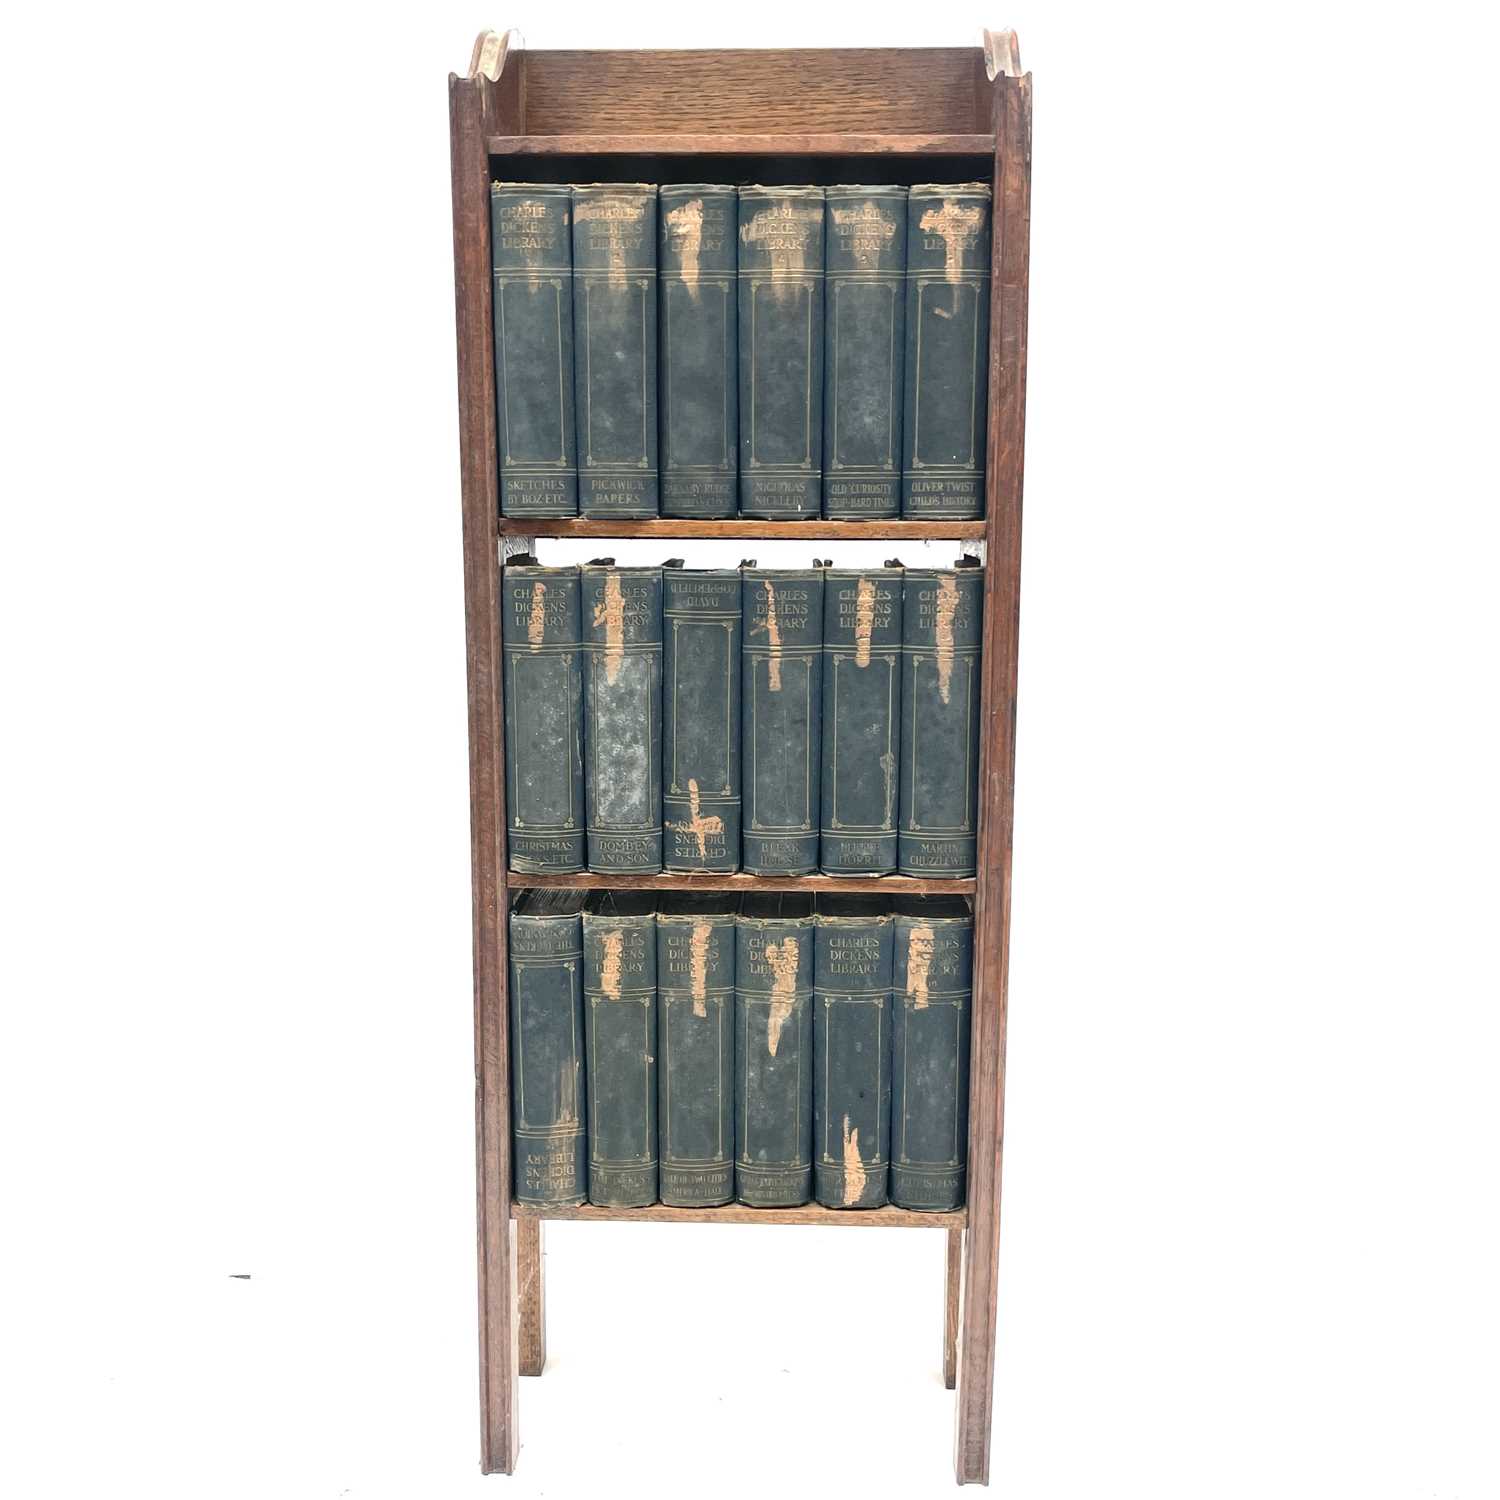 An oak narrow bookcase, early 20th century, containing 18 volumes of the Charles Dickens library,